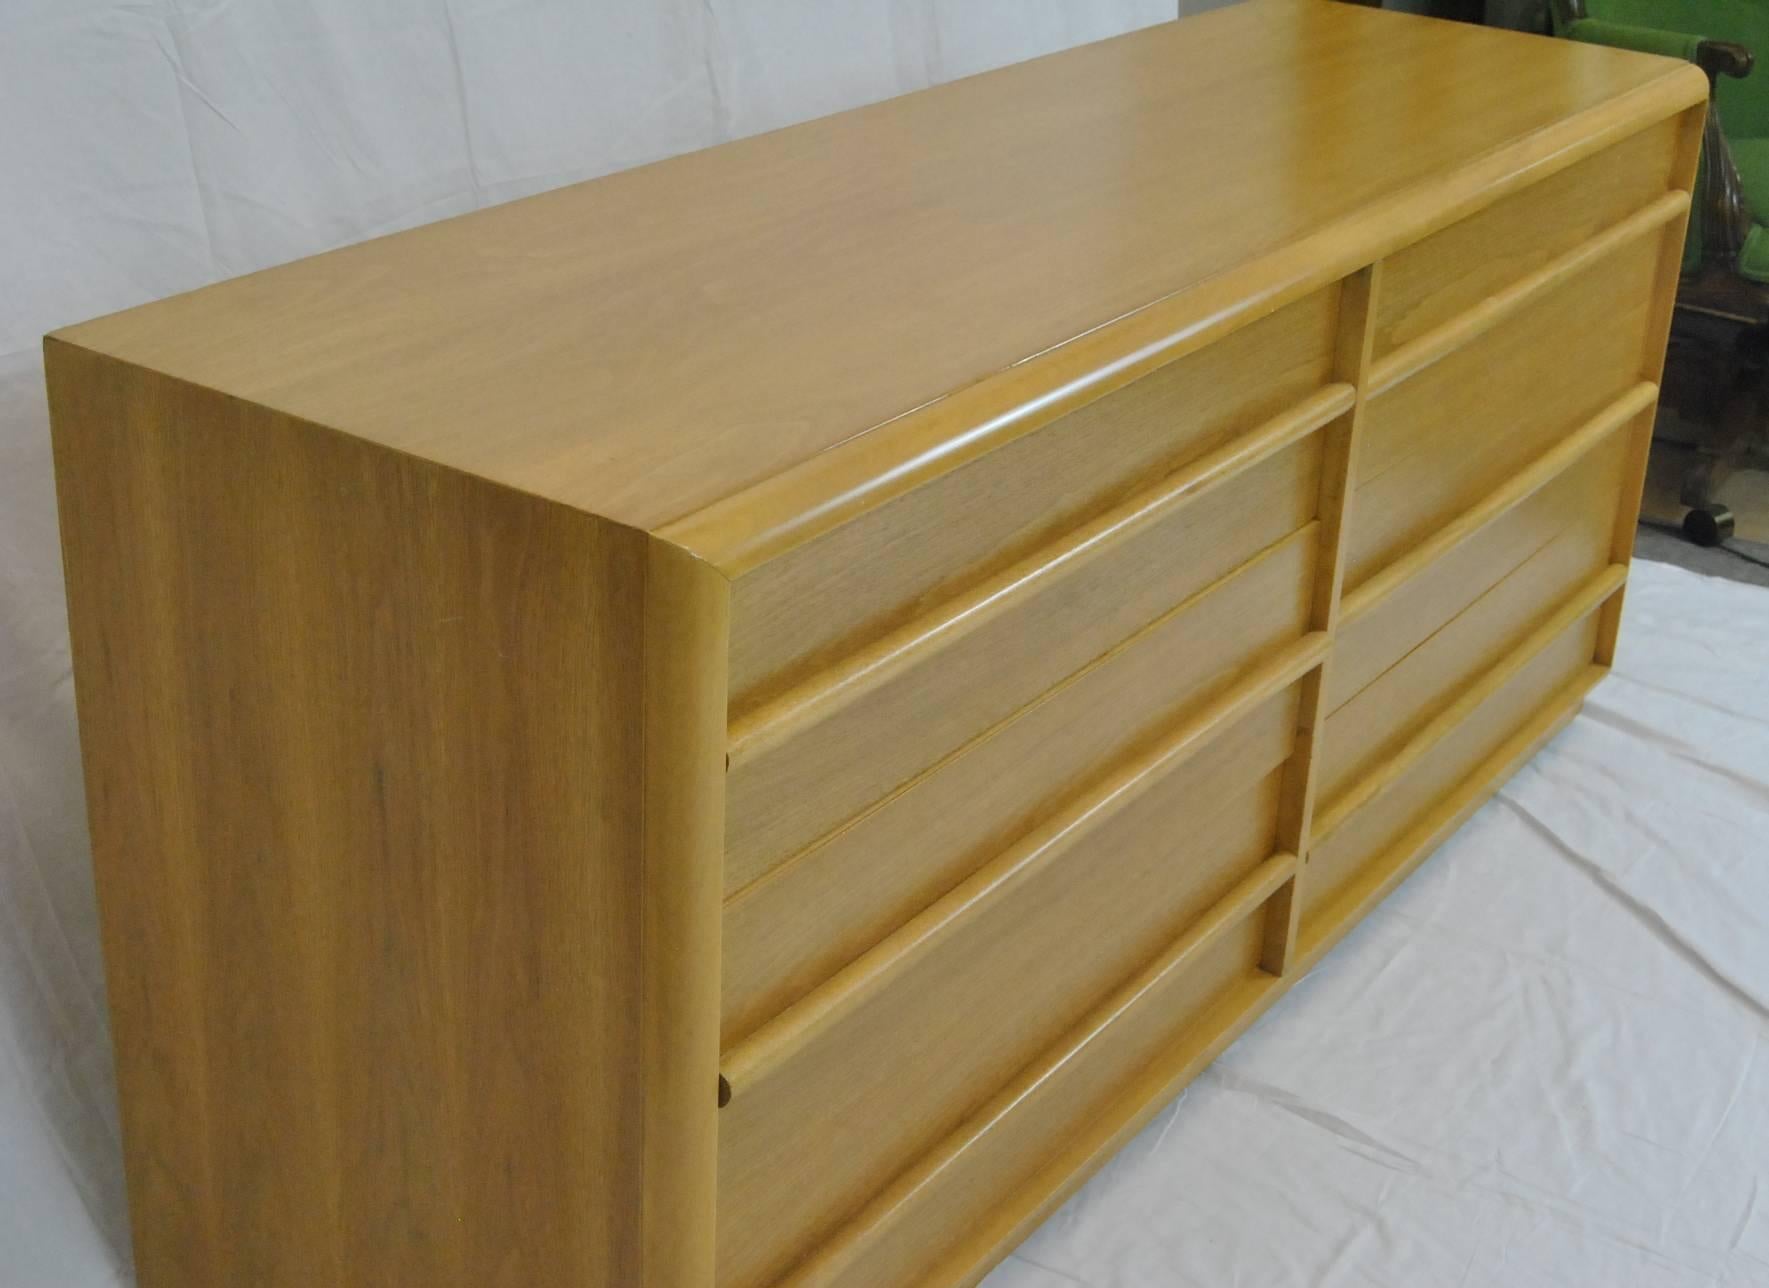 A great Mid-Century Modern six drawer dresser designed by T.H. Robsjohn-Gibbings for the Widdicomb Furniture Company.  The top two drawers have removeable dividers.  Clean lines and great patina.  Dresser may have an old refinish but, if so, it was